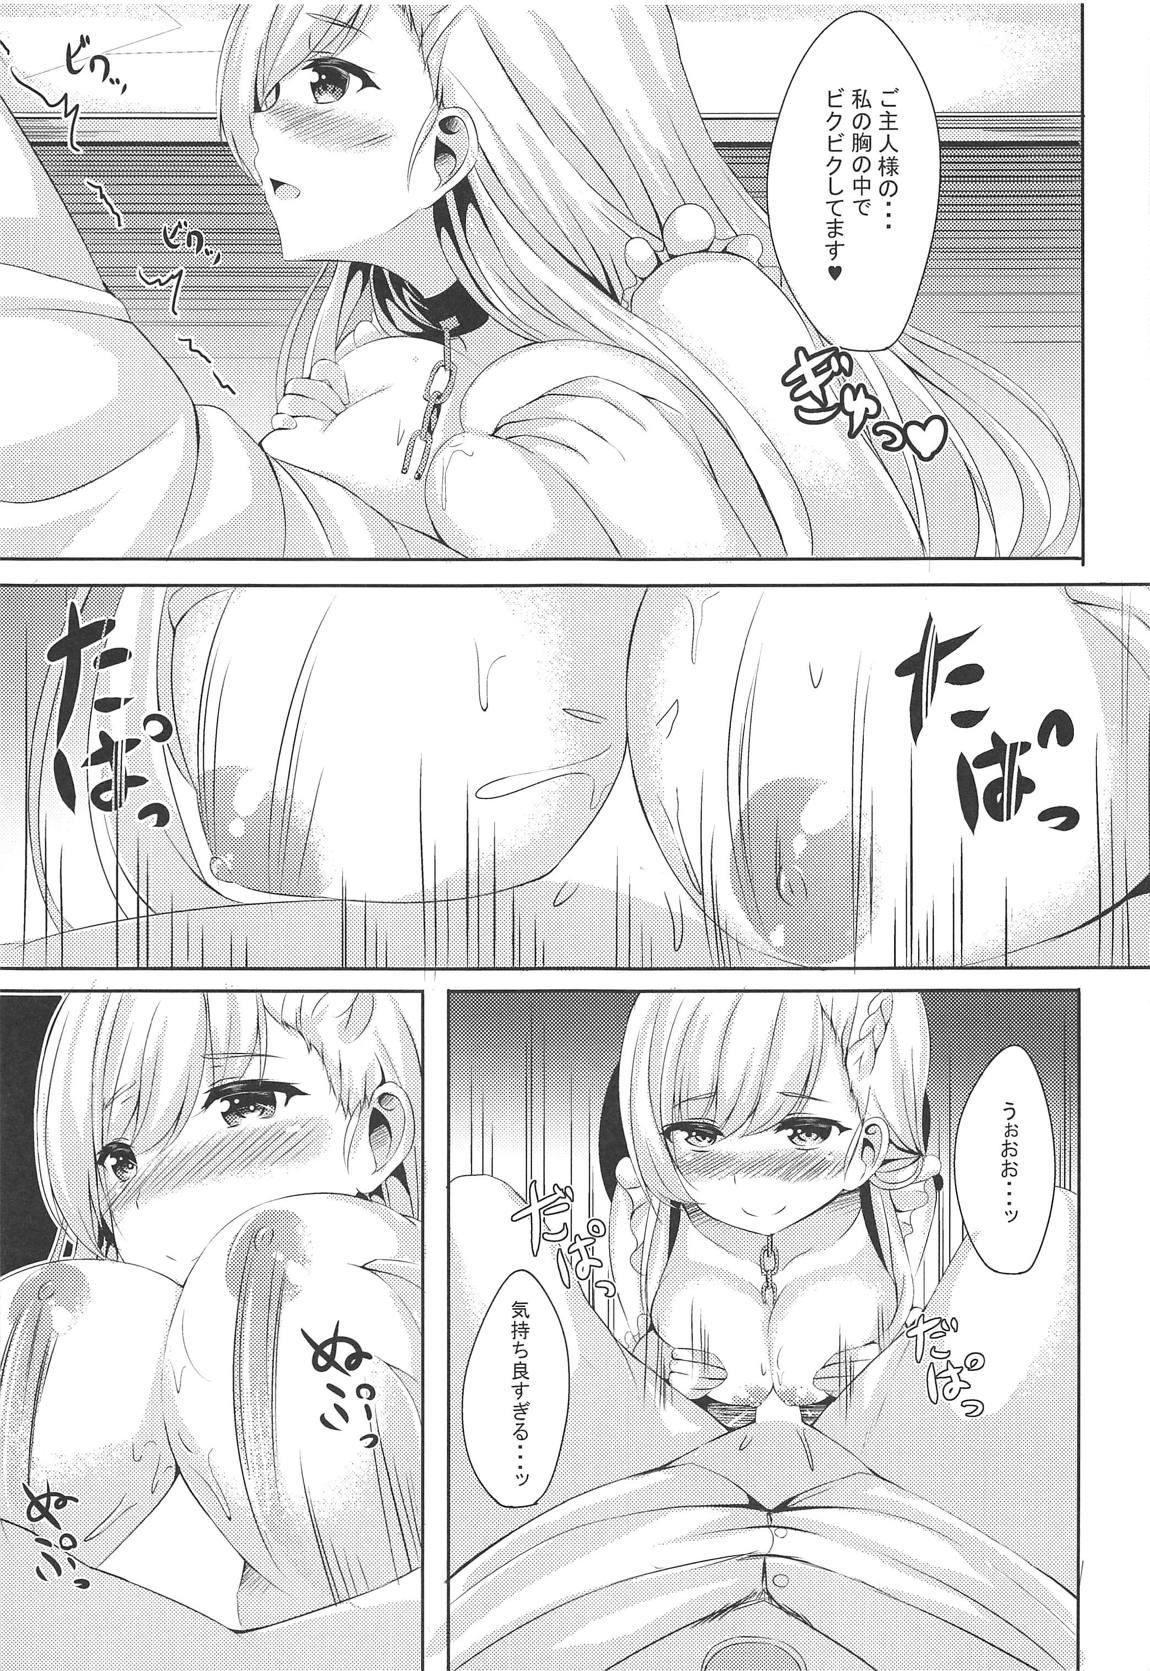 Sloppy Blowjob ring the bell - Azur lane Plump - Page 11